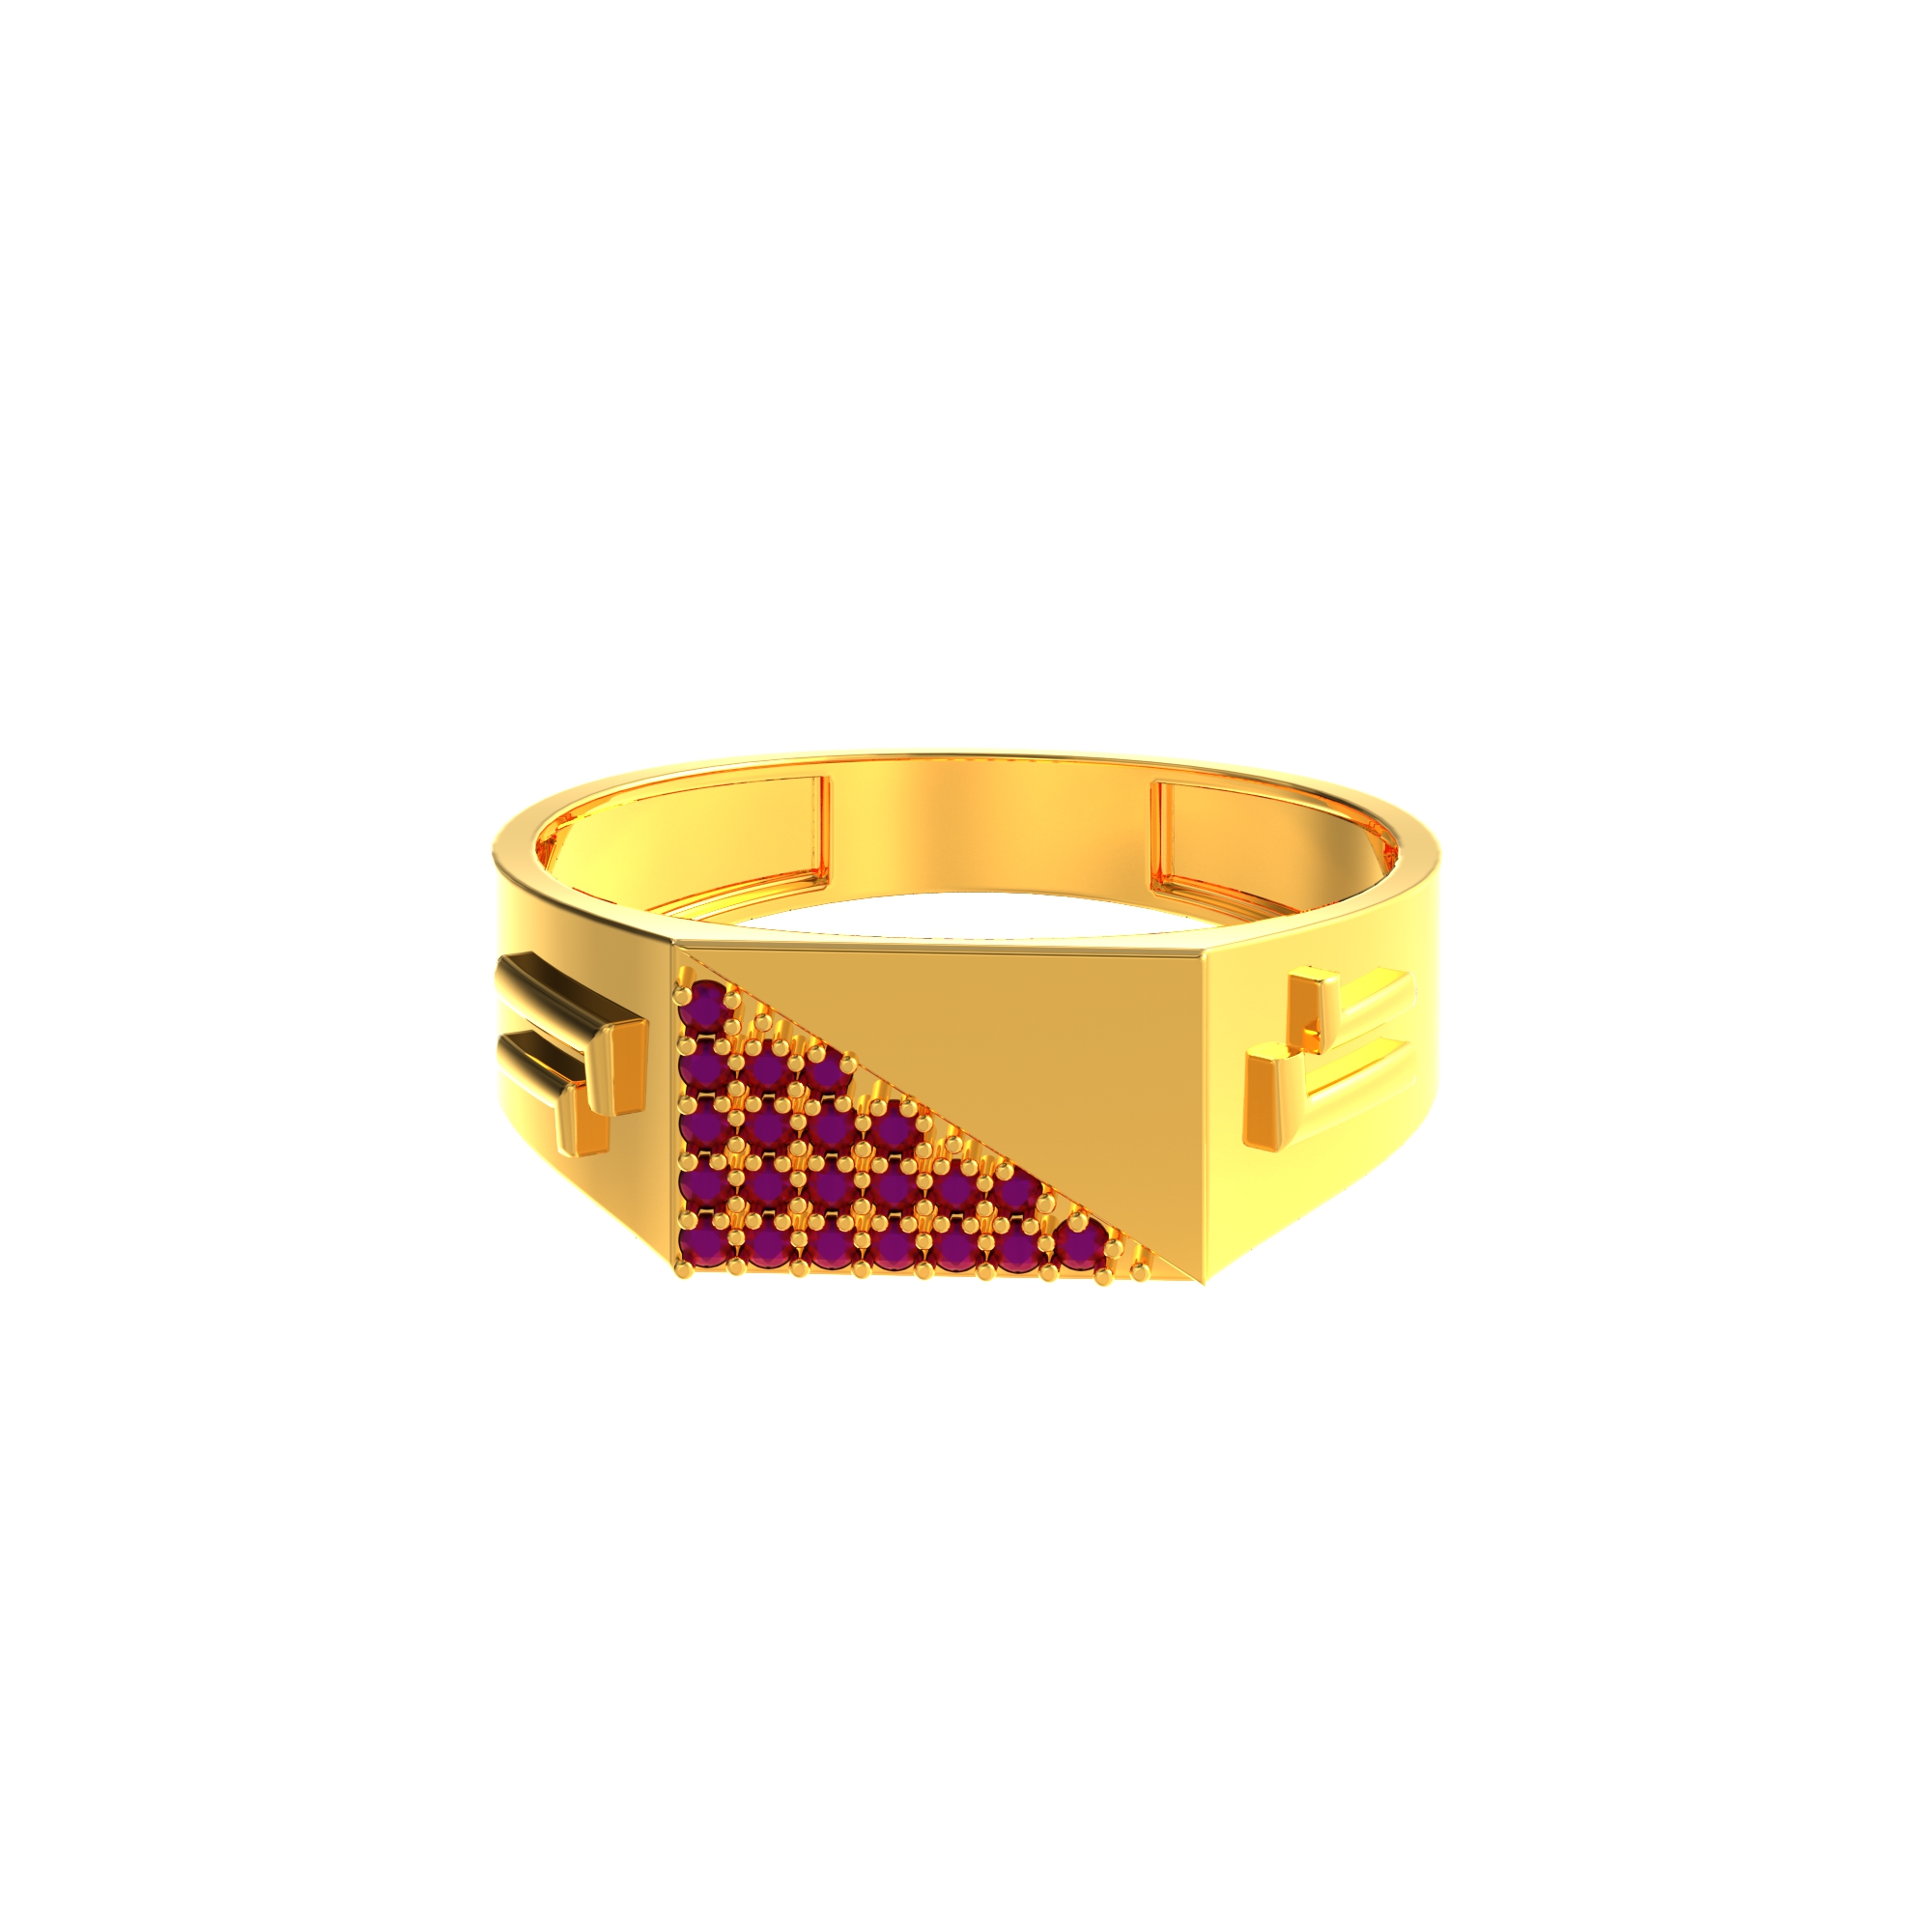 Gents Gold Ring With Geometric Design